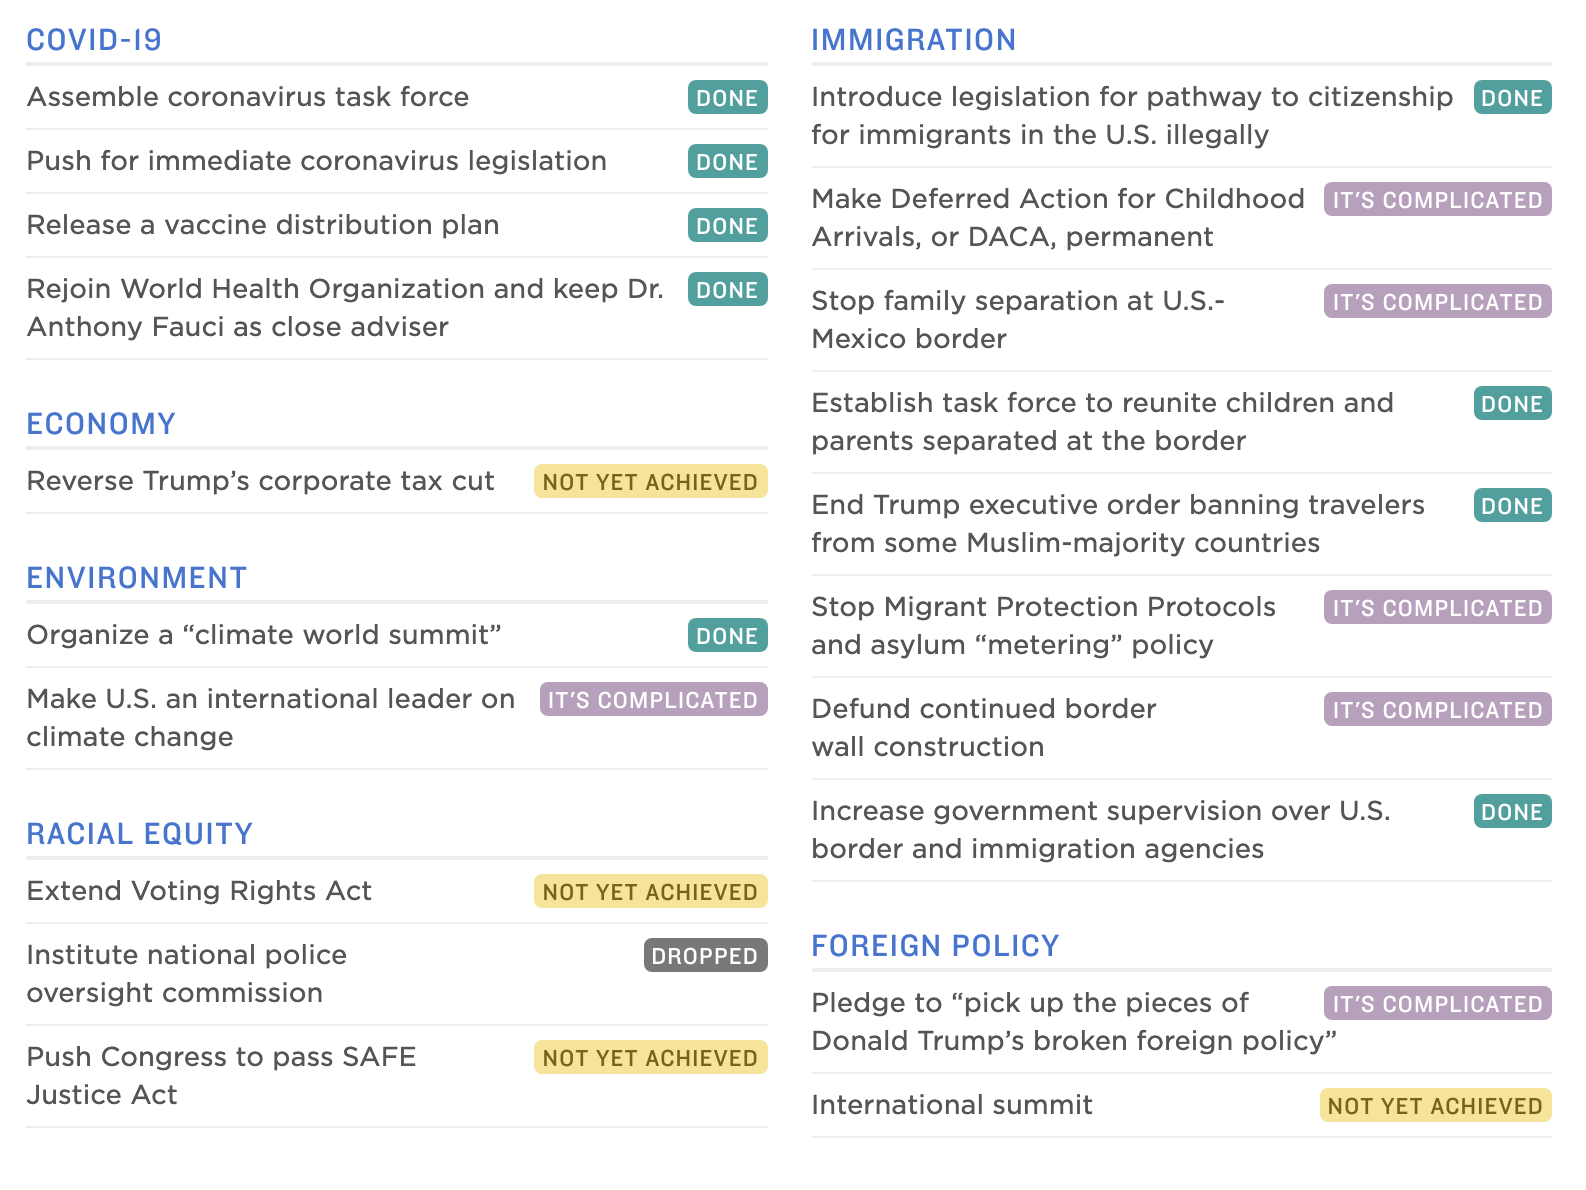 How BIden has fared re: his promises during his first 100 days in office